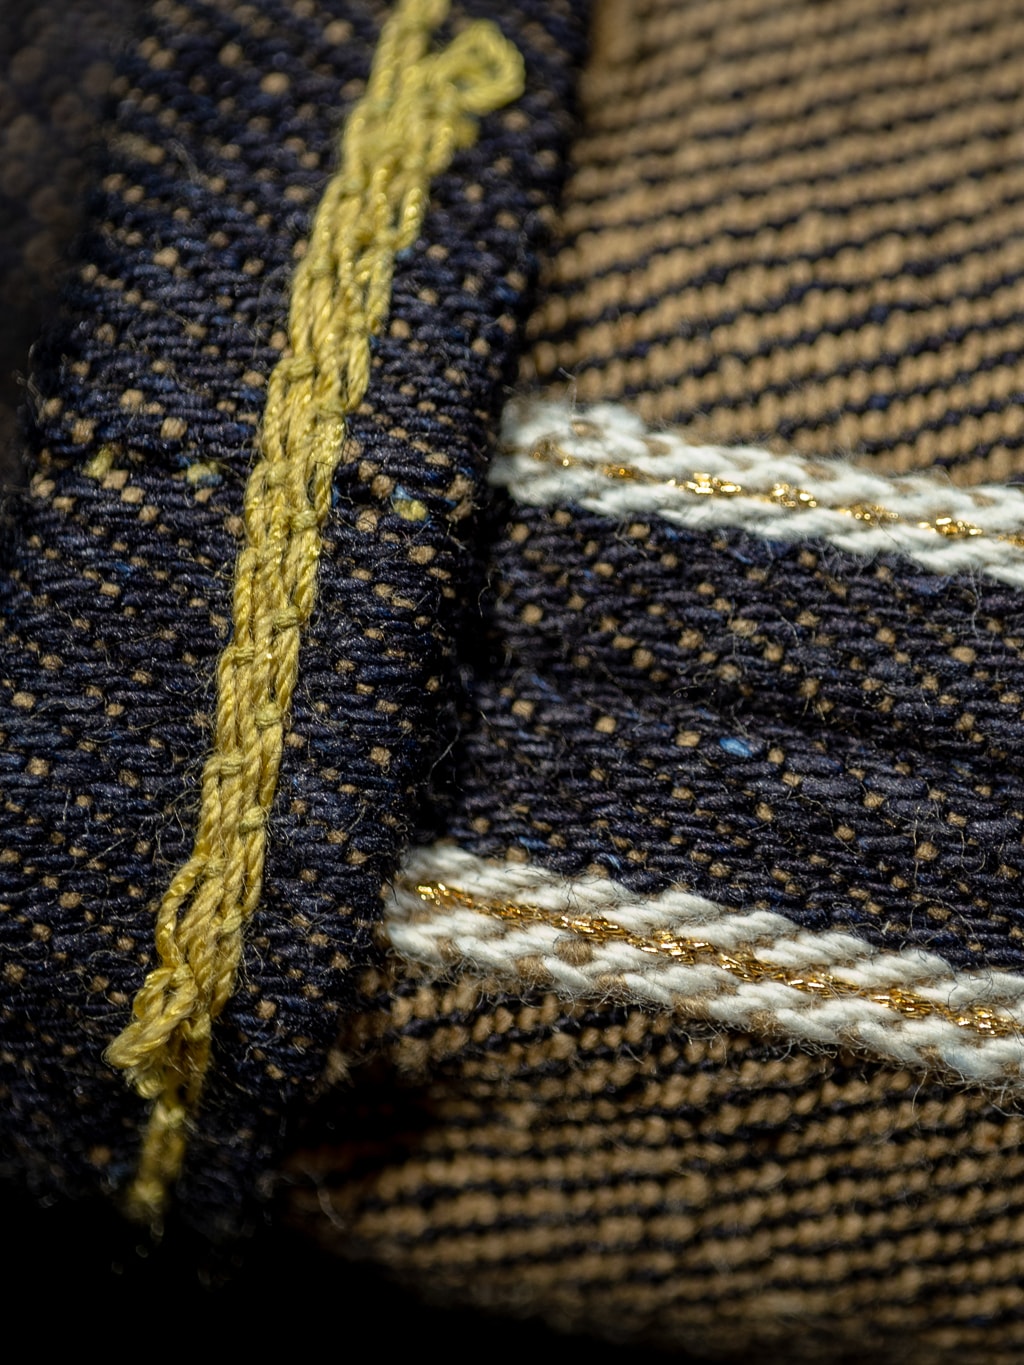 The Strike Gold Brown Weft Slim Jeans gold selvedge detail